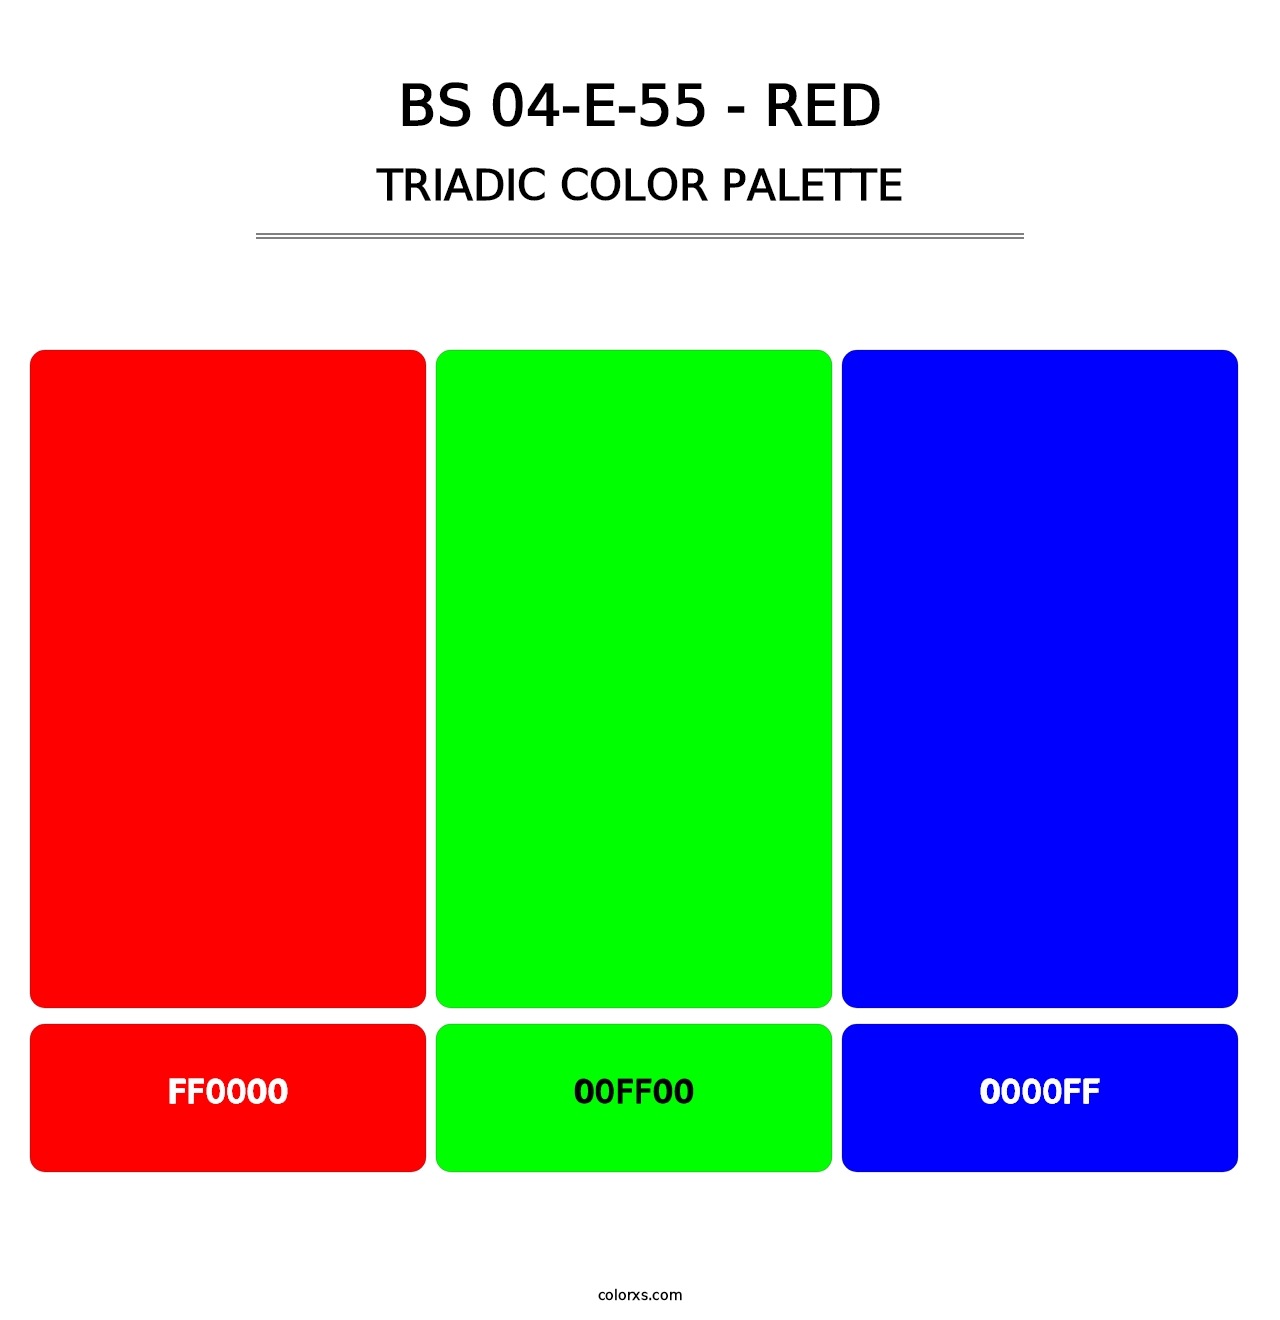 BS 04-E-55 - Red - Triadic Color Palette